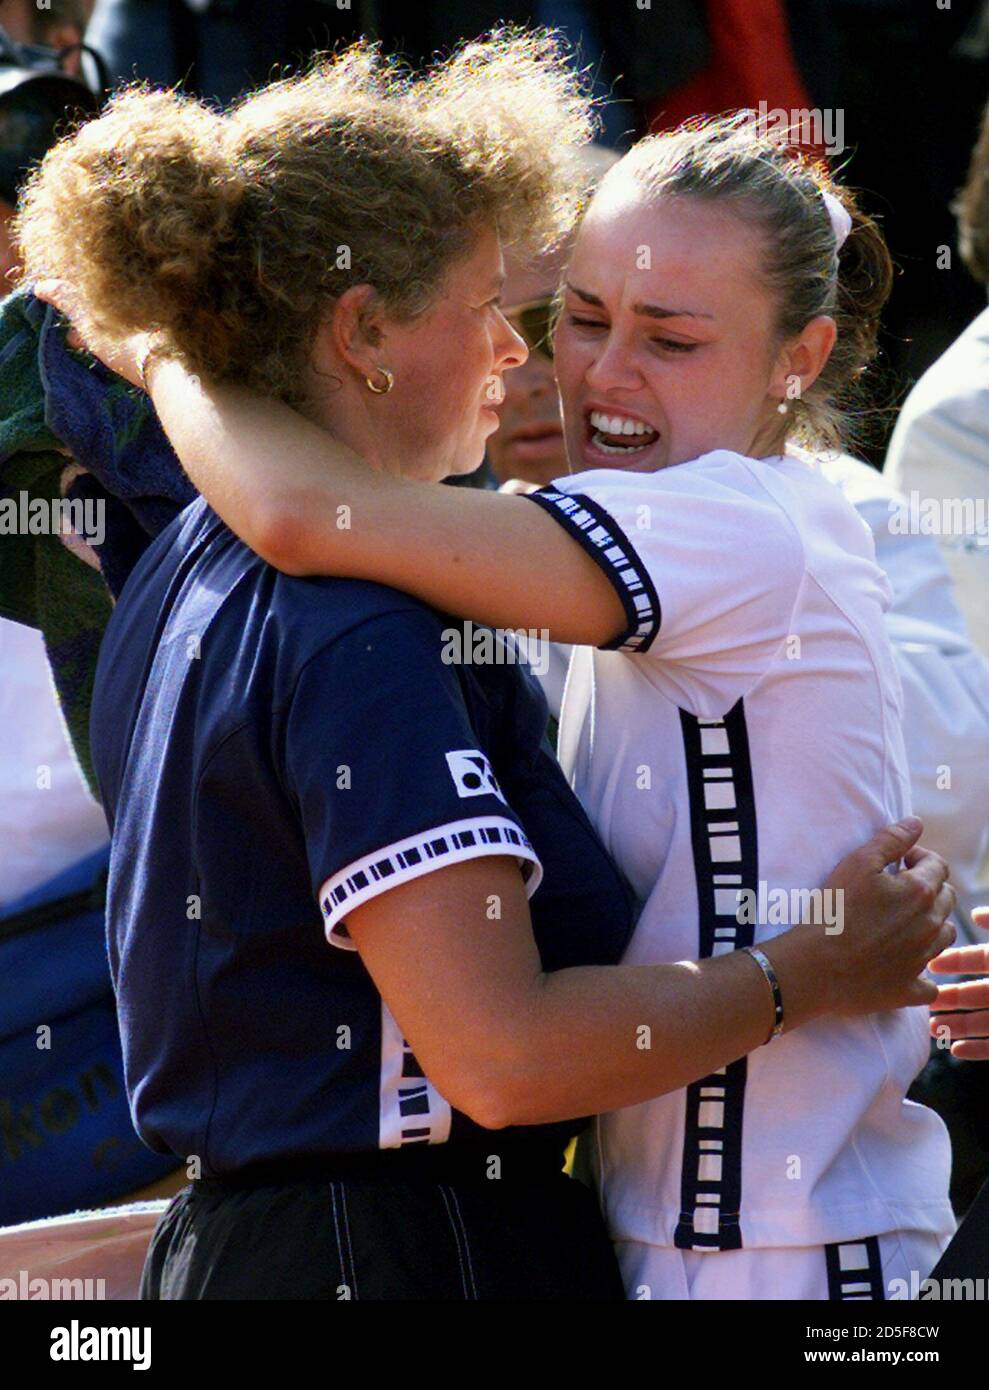 Martina Hingis (R) of Switzerland is consoled by her mother Melanie Molitor  after she was defeated by Steffi Graf of Germany in the Roland Garros  French tennis Open Women's final June 5.